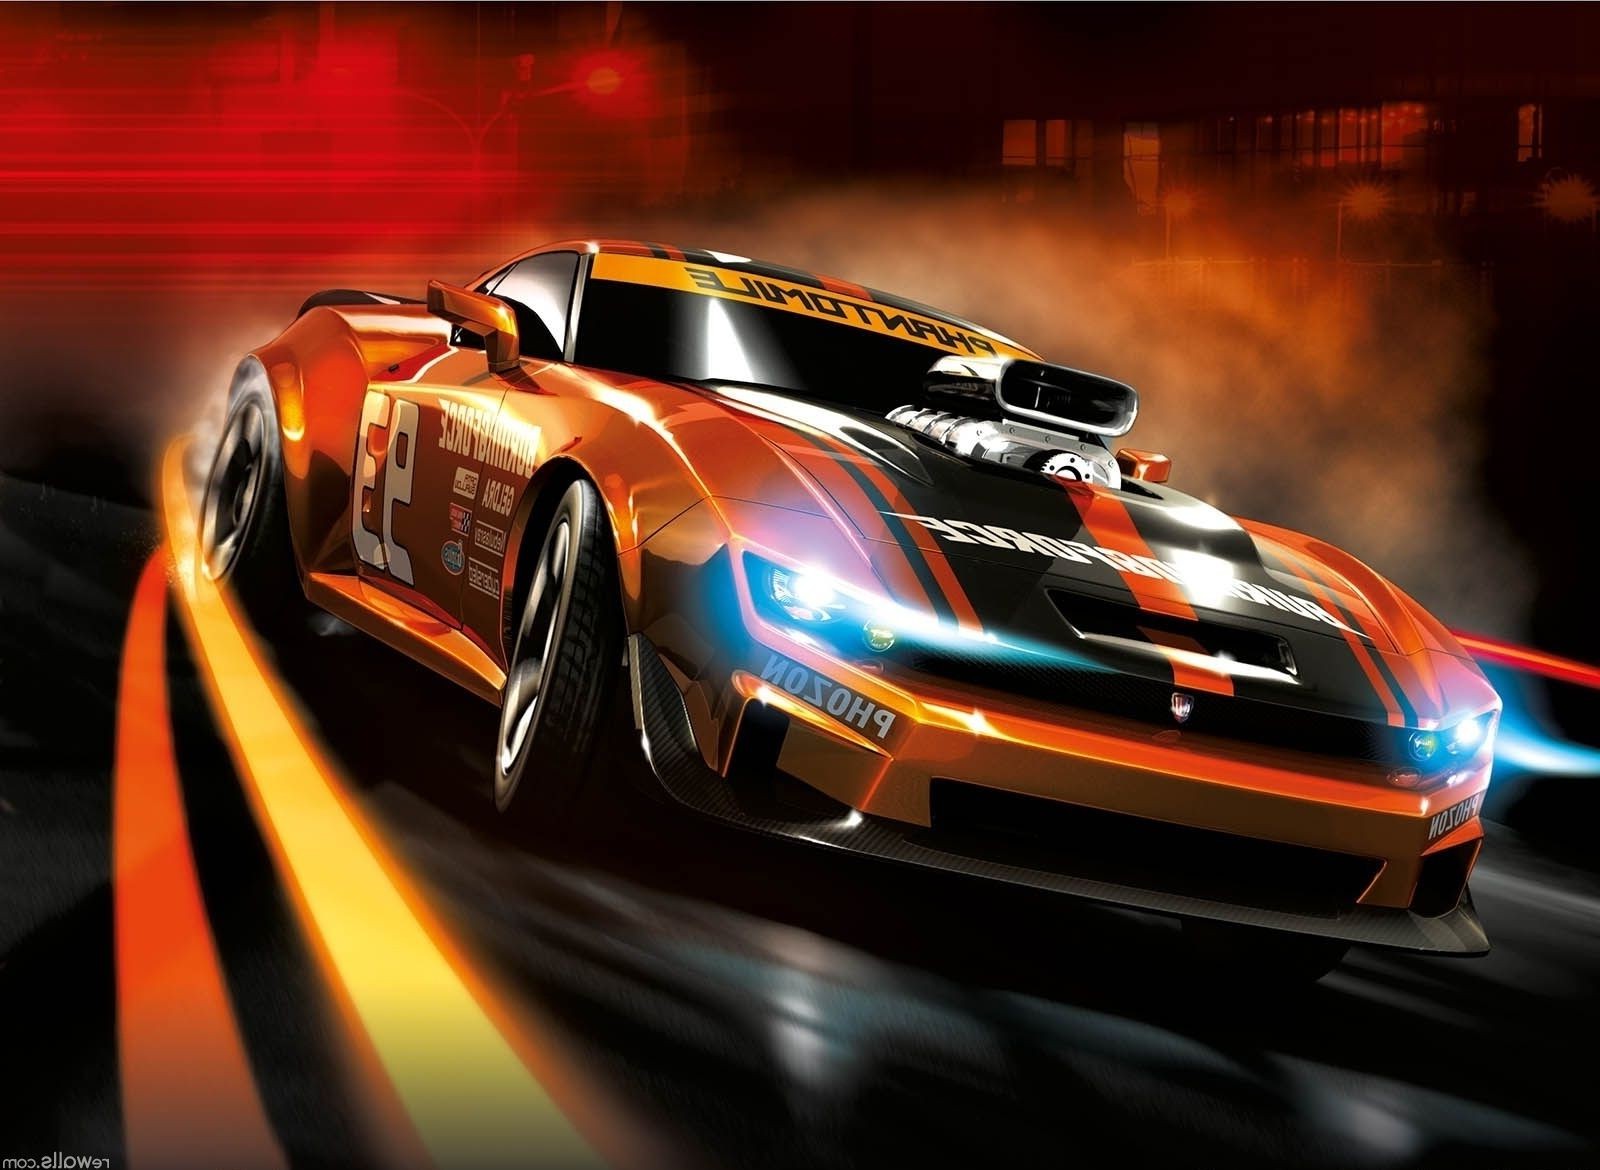 race car fast hurry action blur auto racing vehicle